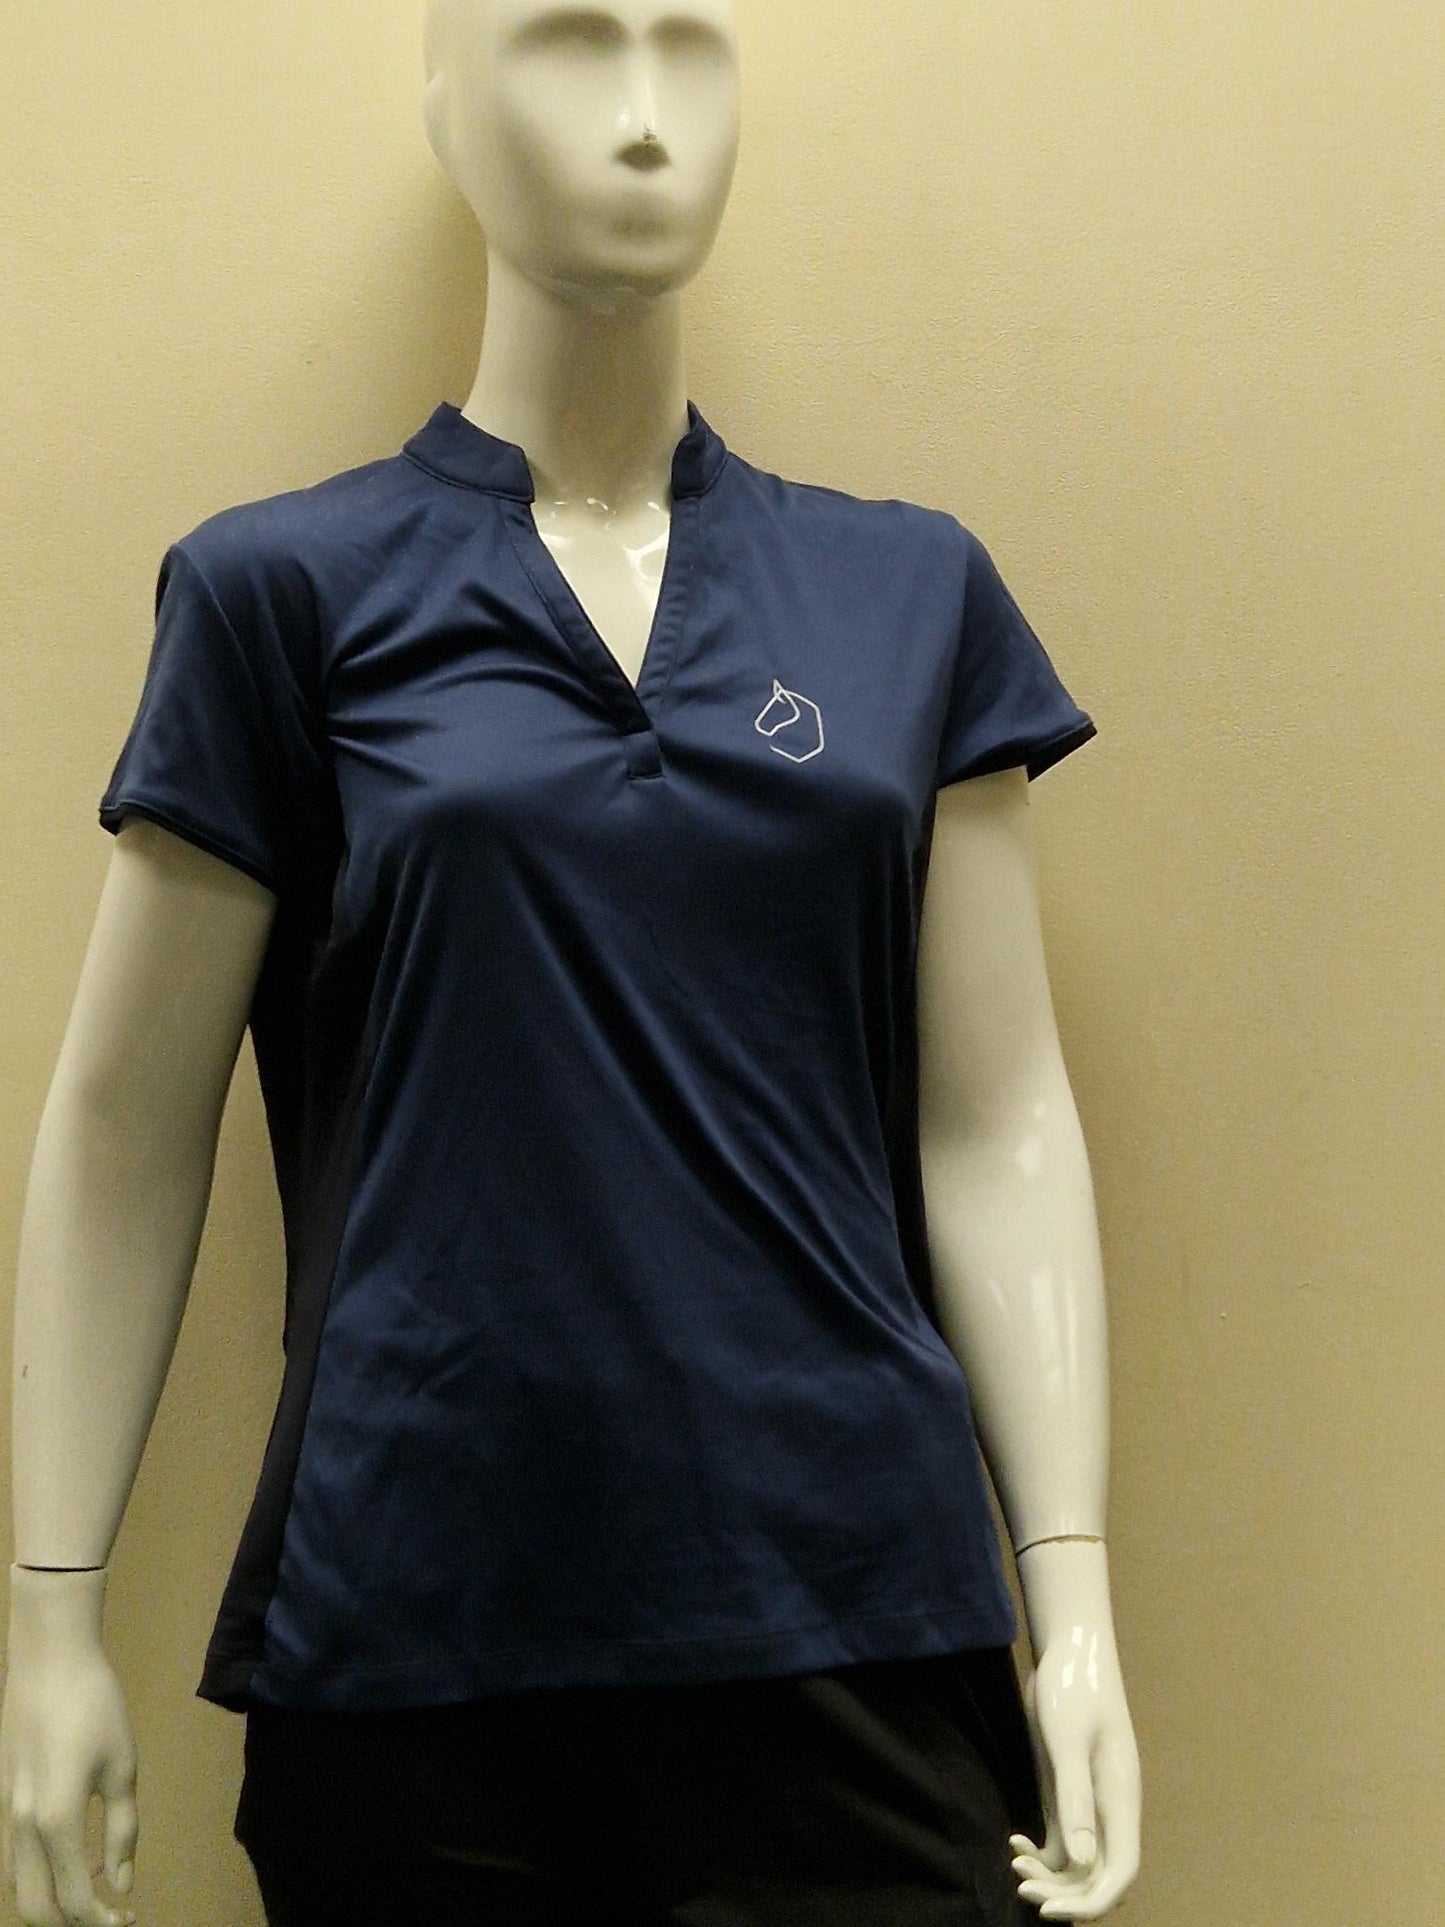 Decathlon Ladies T-Shirt in Navy Blue - Size Large